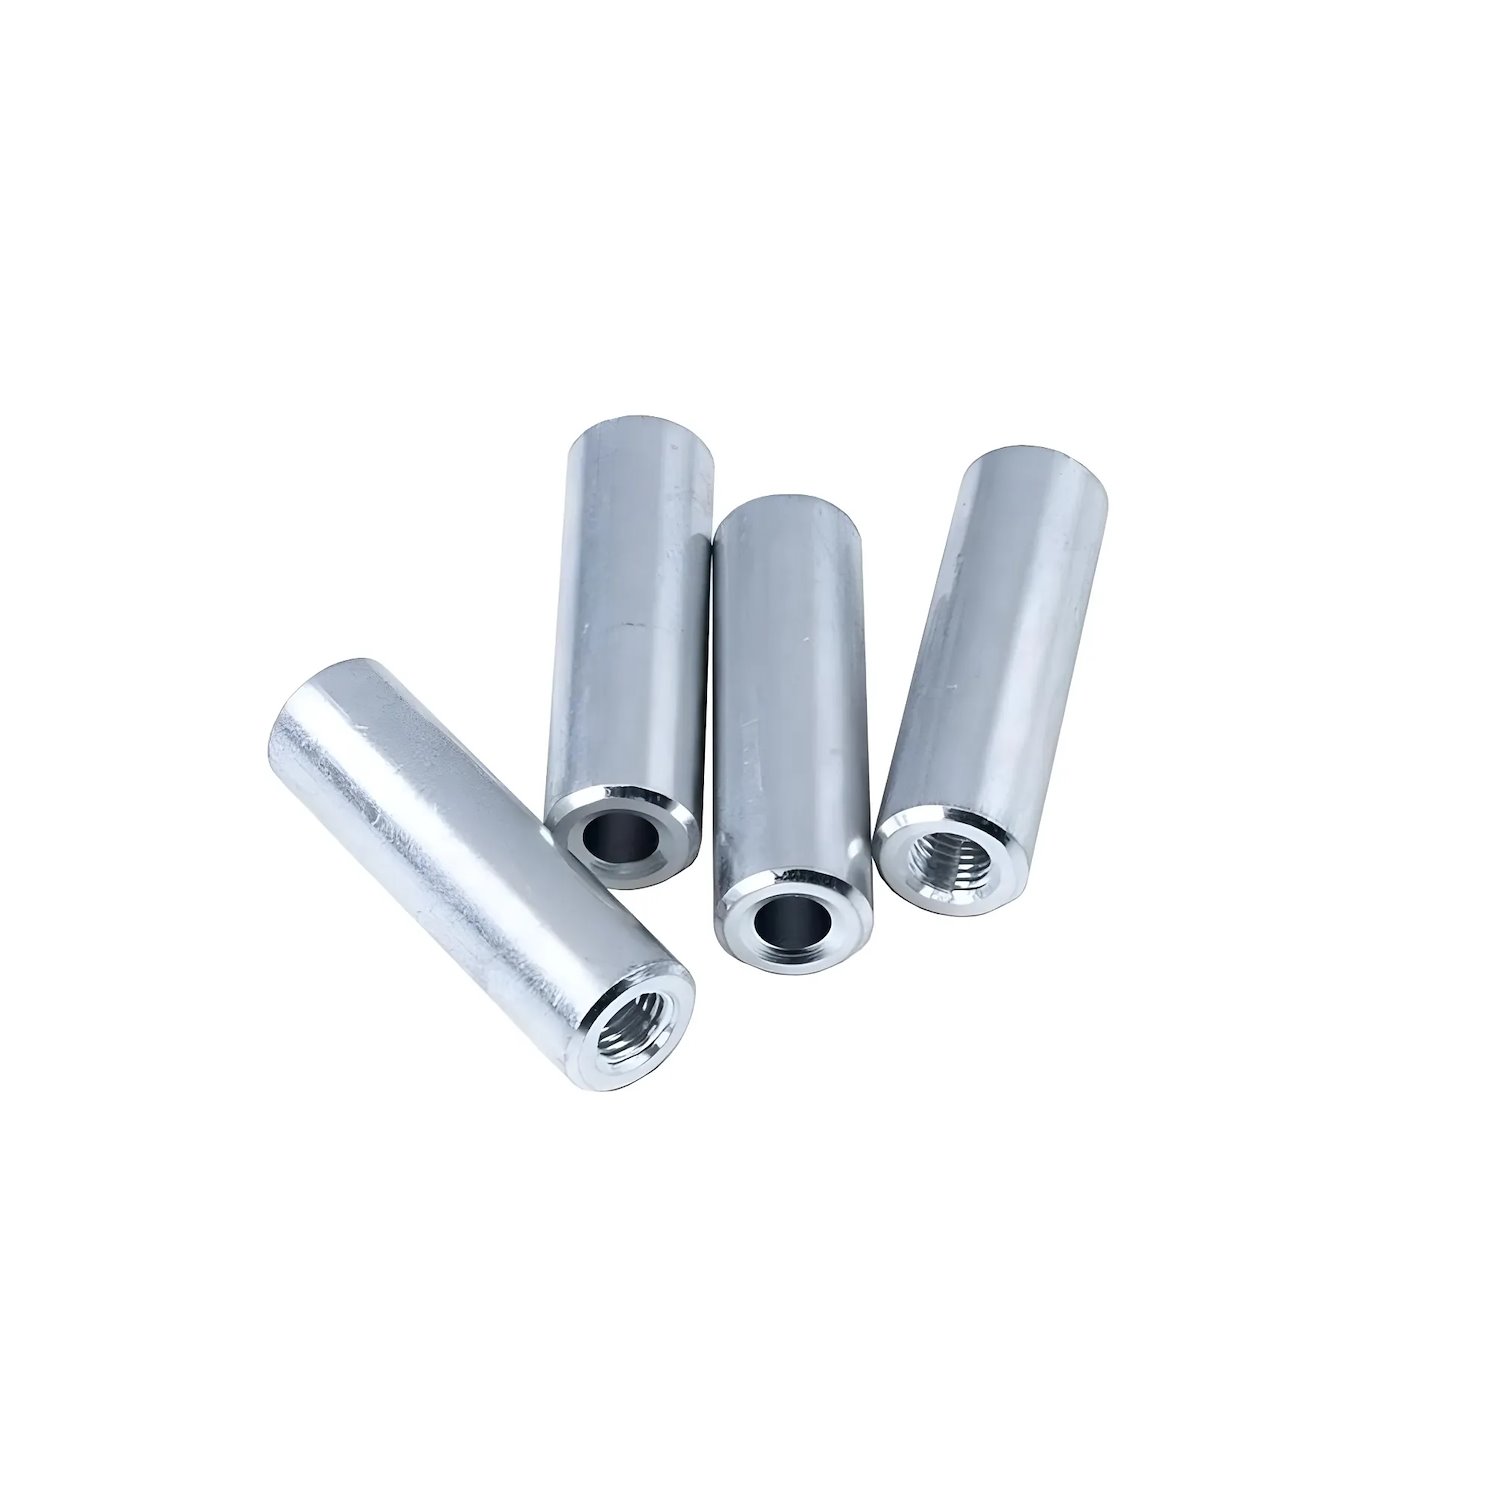 00-01666-4 1/16 in. Annular Nozzle Bungs, 4 Pack